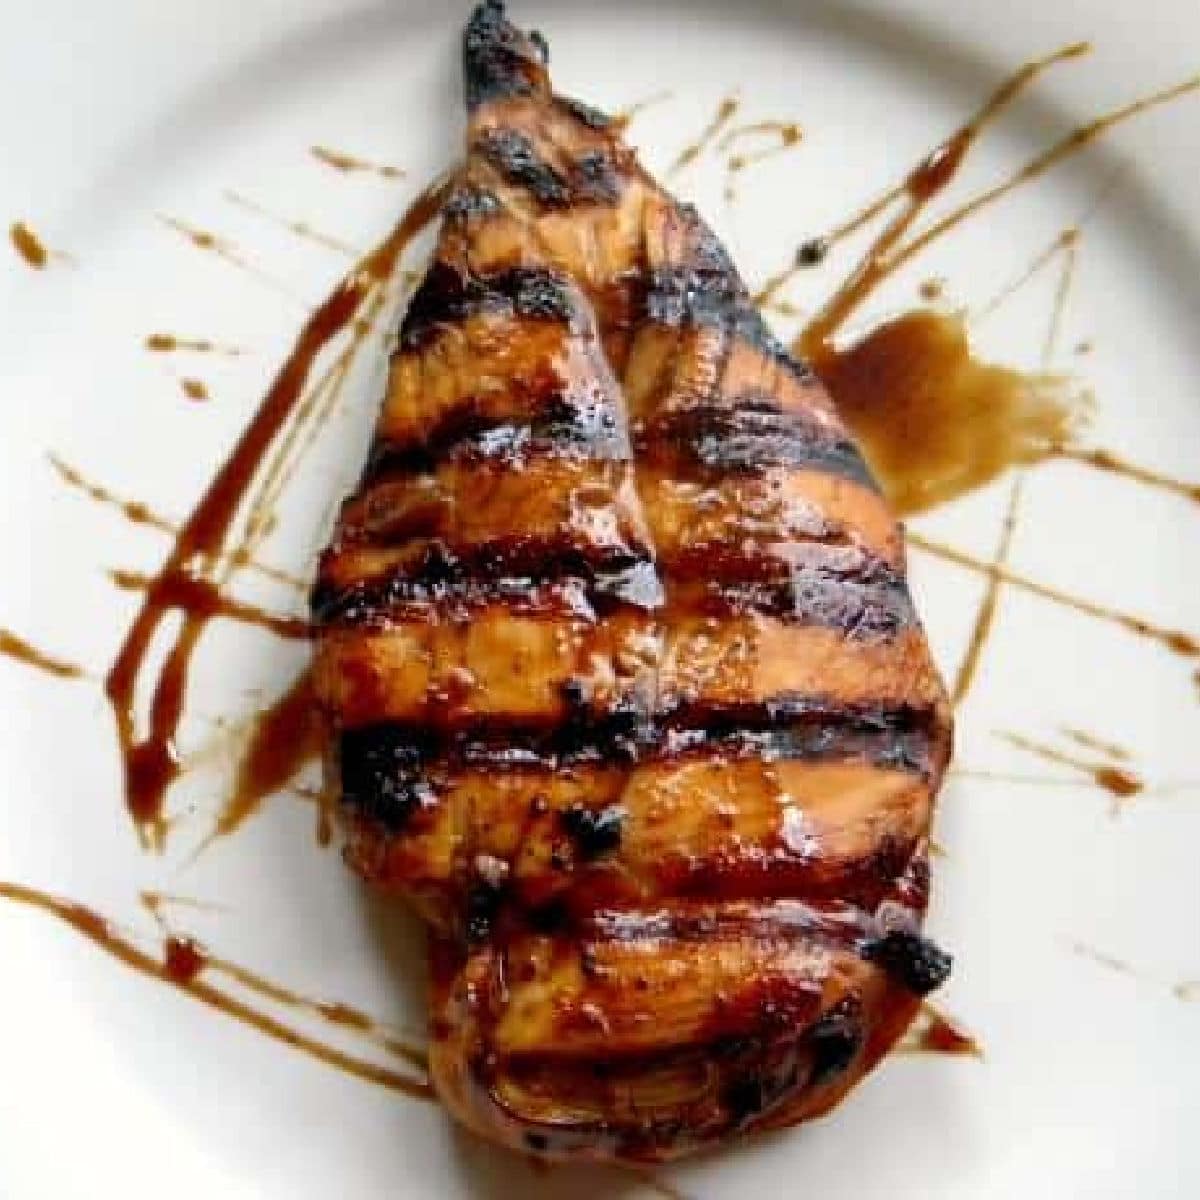 Overhead view of a chicken breast with a sticky Dr Pepper glaze.